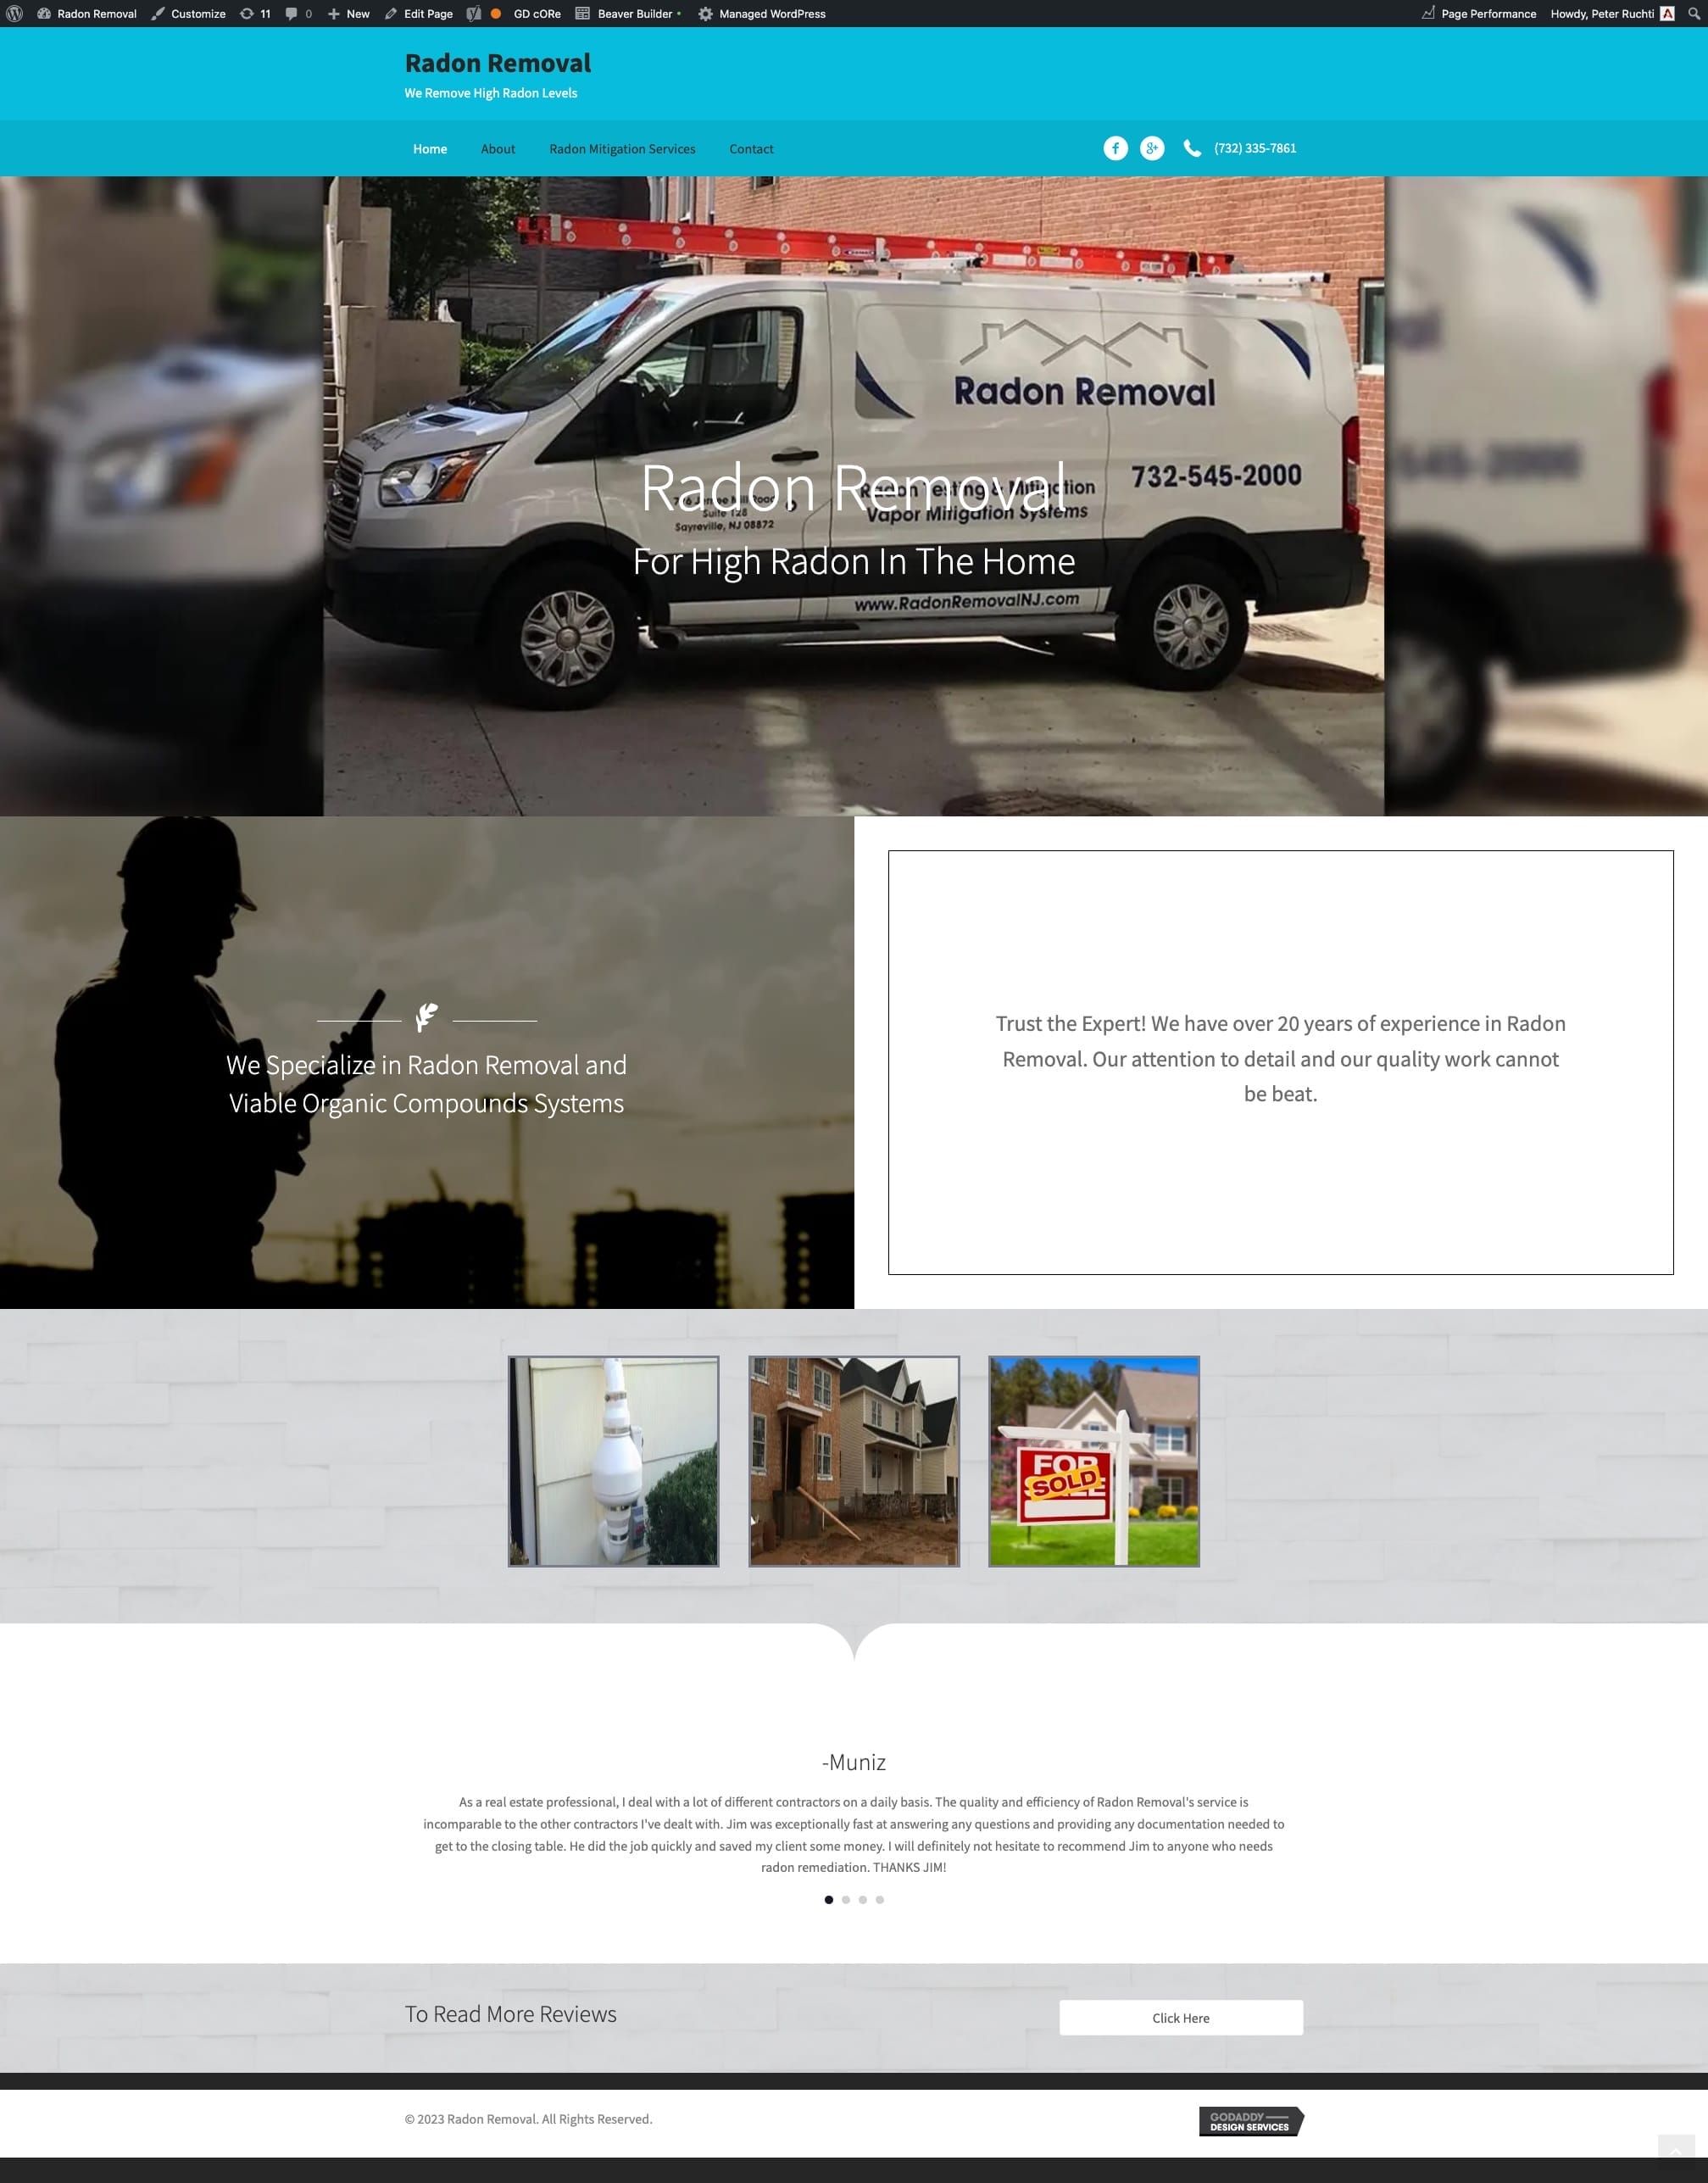 Radon Removal's old website which was in need of SEO and a website redesign